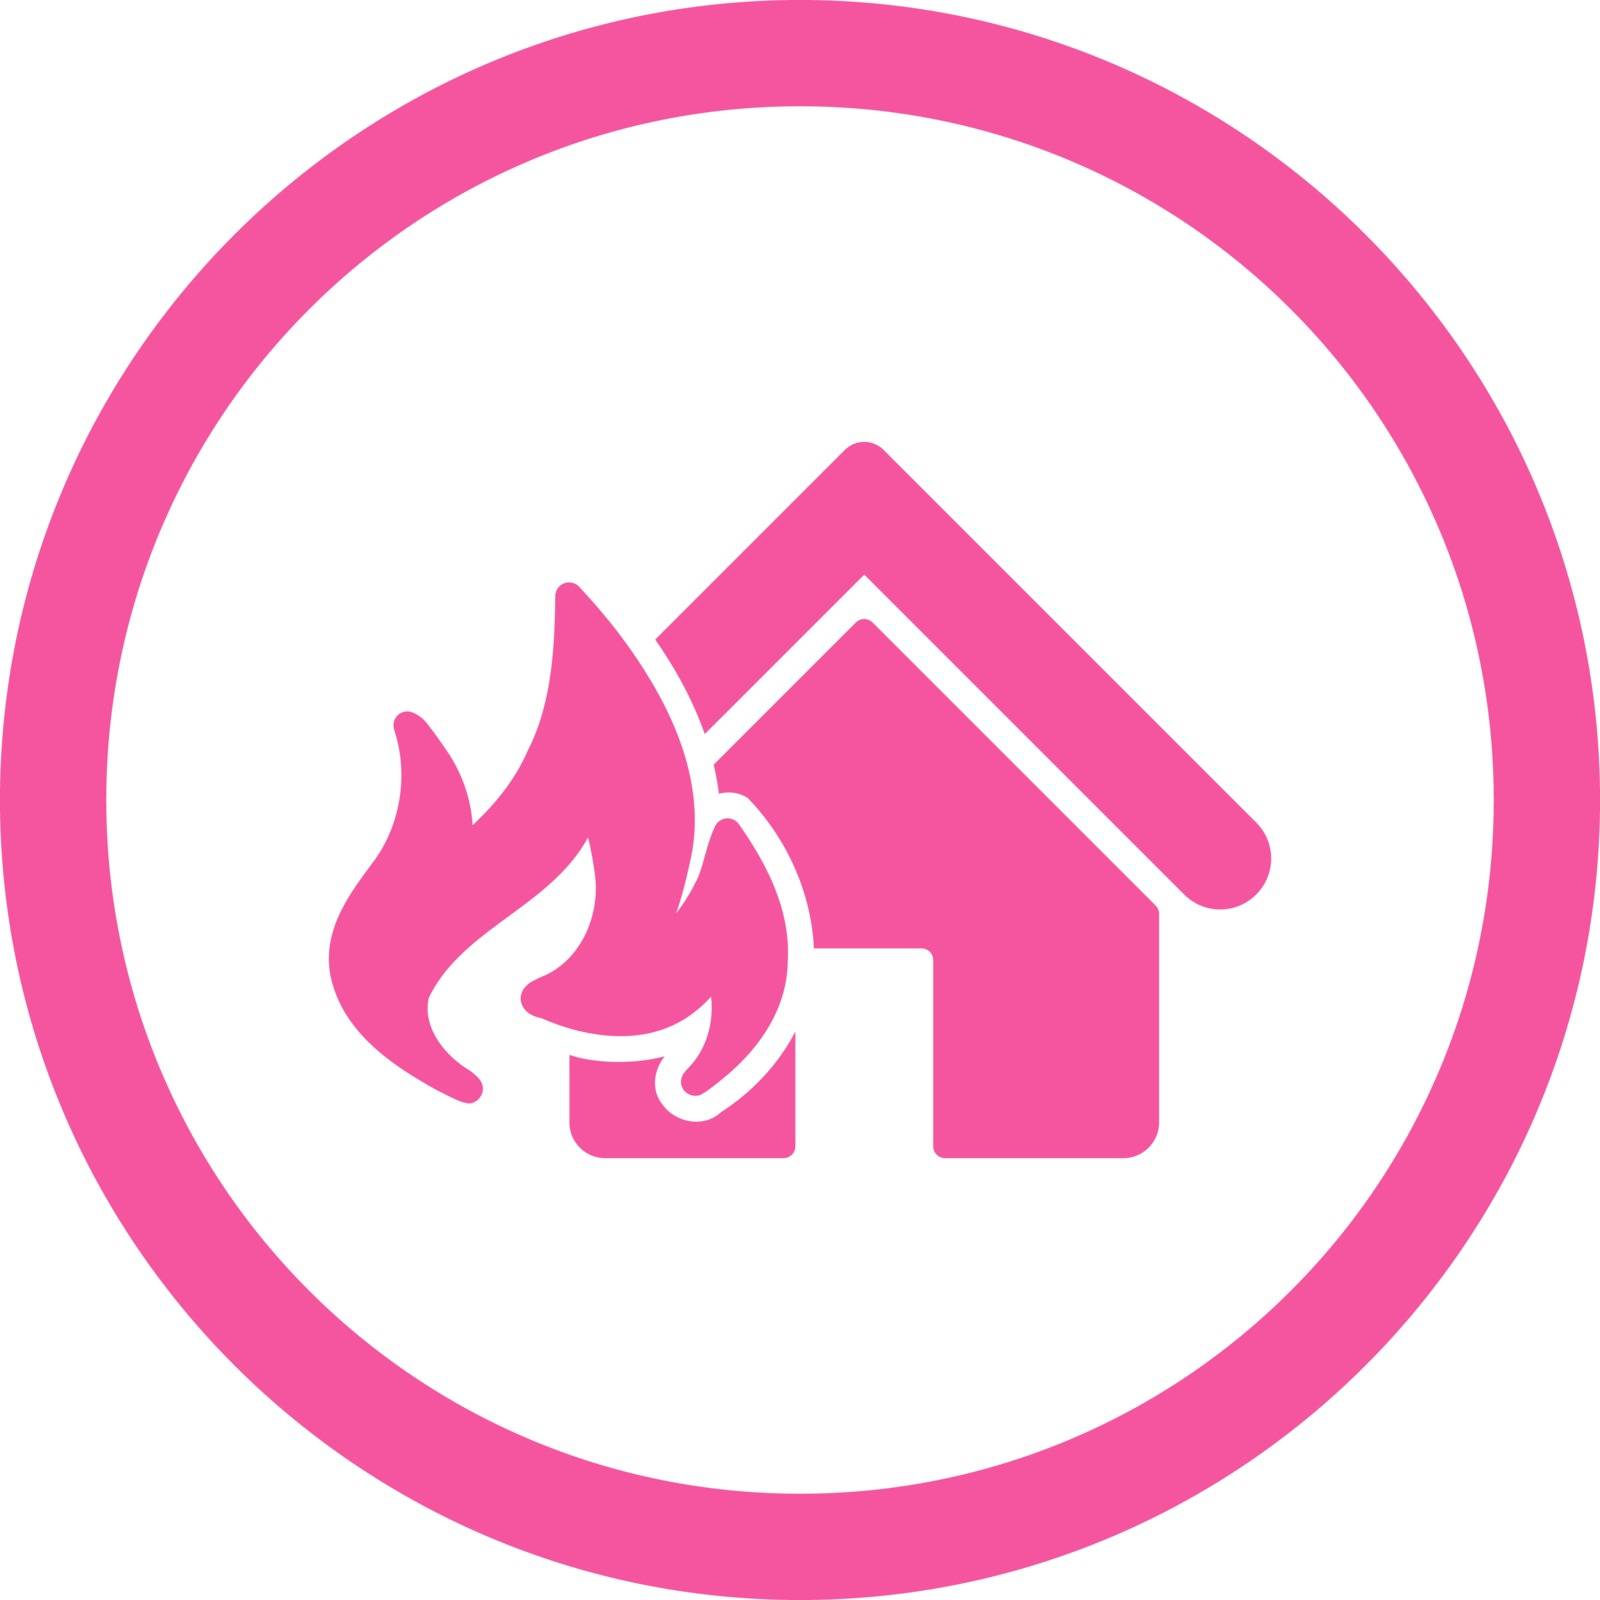 Fire Damage vector icon. This flat rounded symbol uses pink color and isolated on a white background.